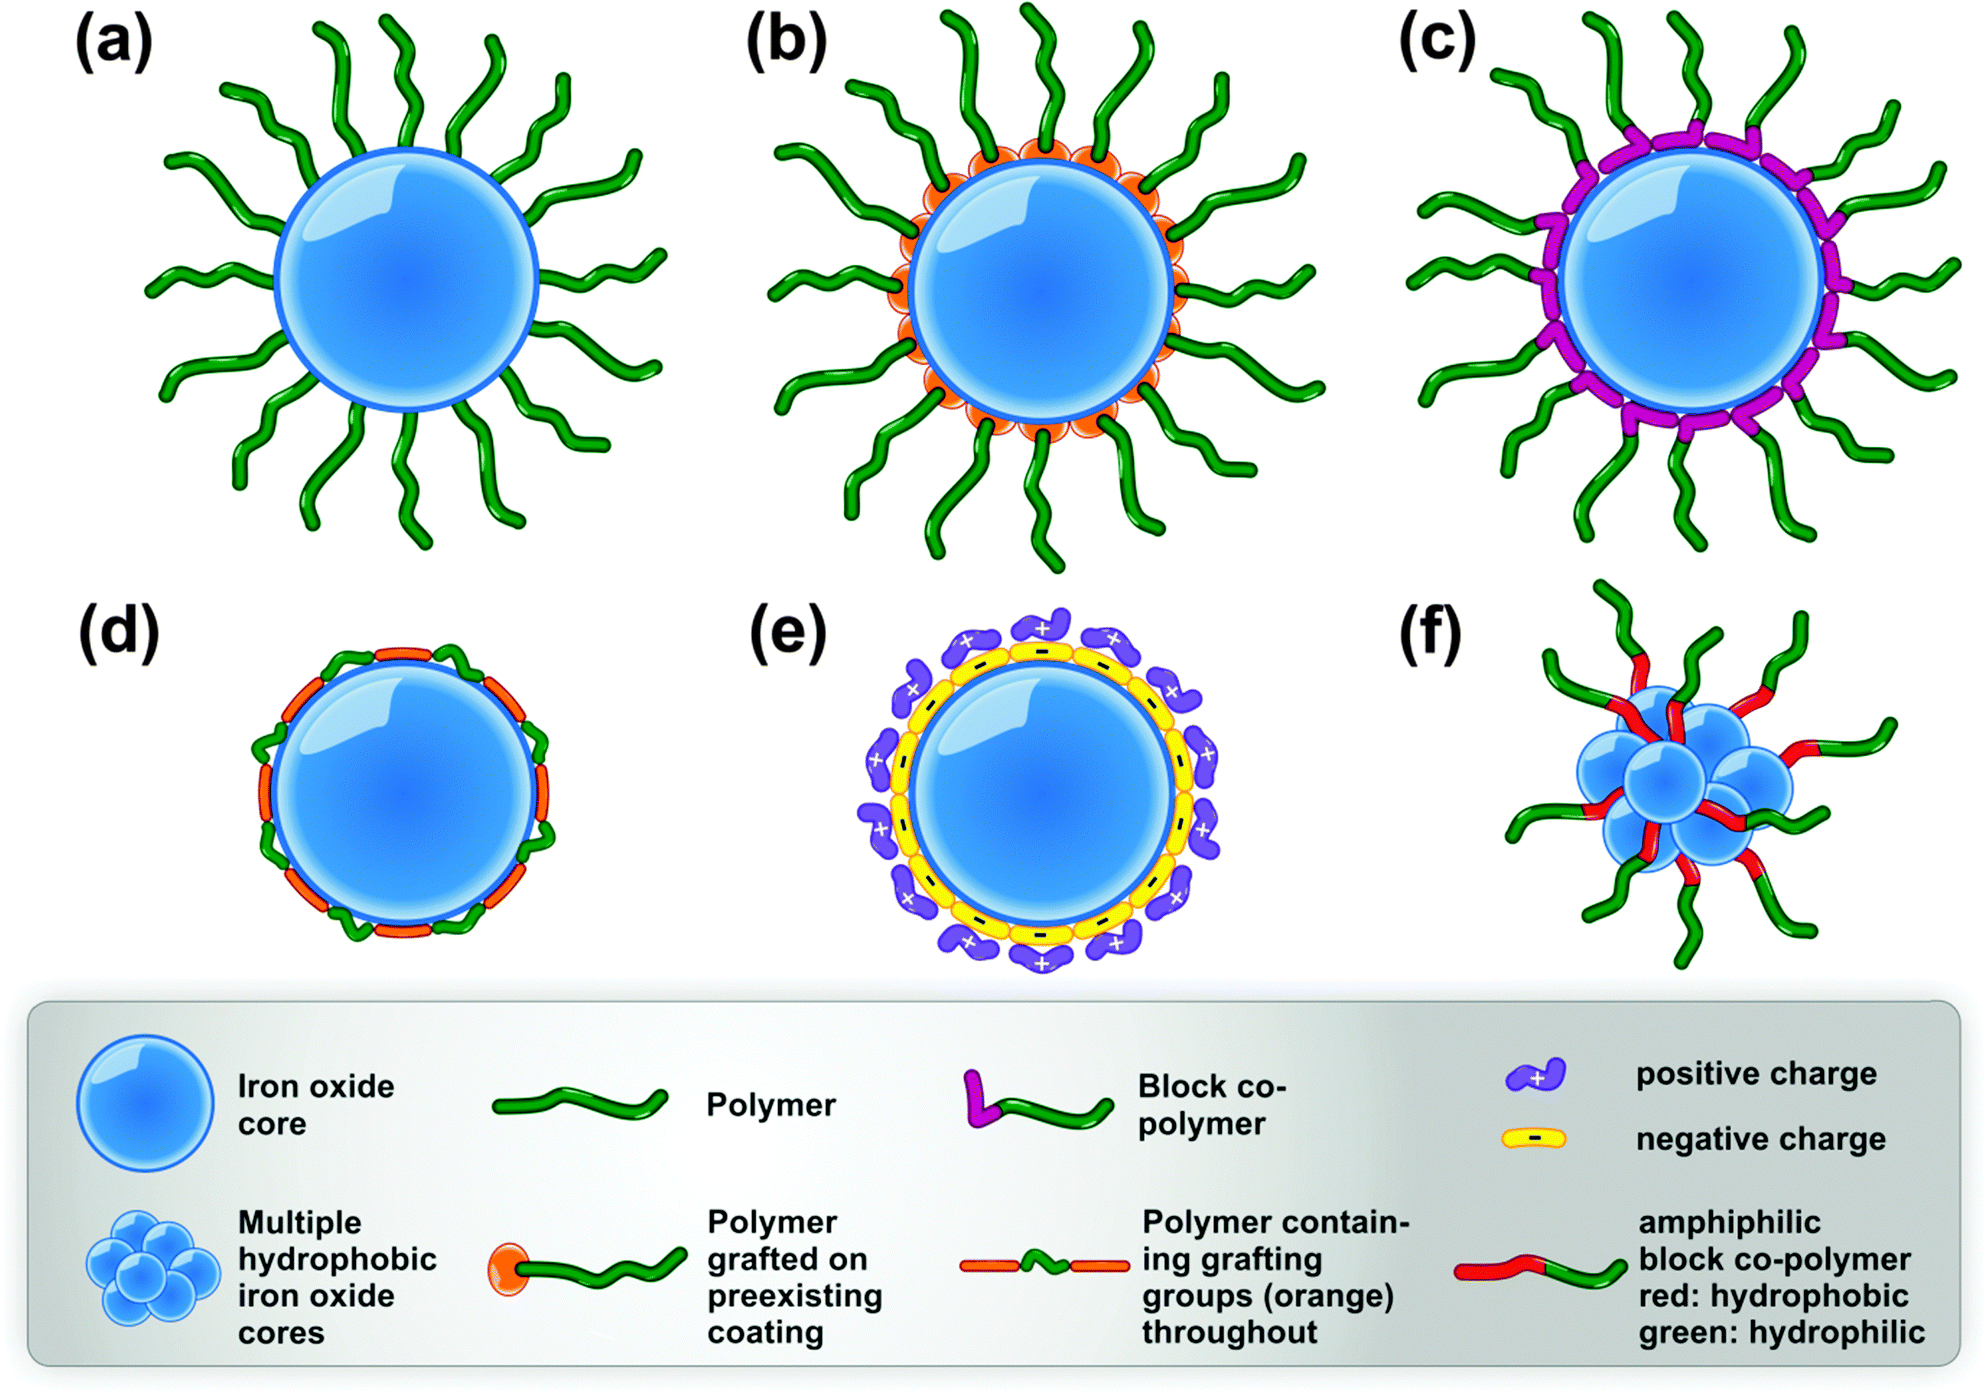 Design considerations for the synthesis of polymer coated iron oxide  nanoparticles for stem cell labelling and tracking using MRI - Chemical  Society Reviews (RSC Publishing) DOI:10.1039/C5CS00331H